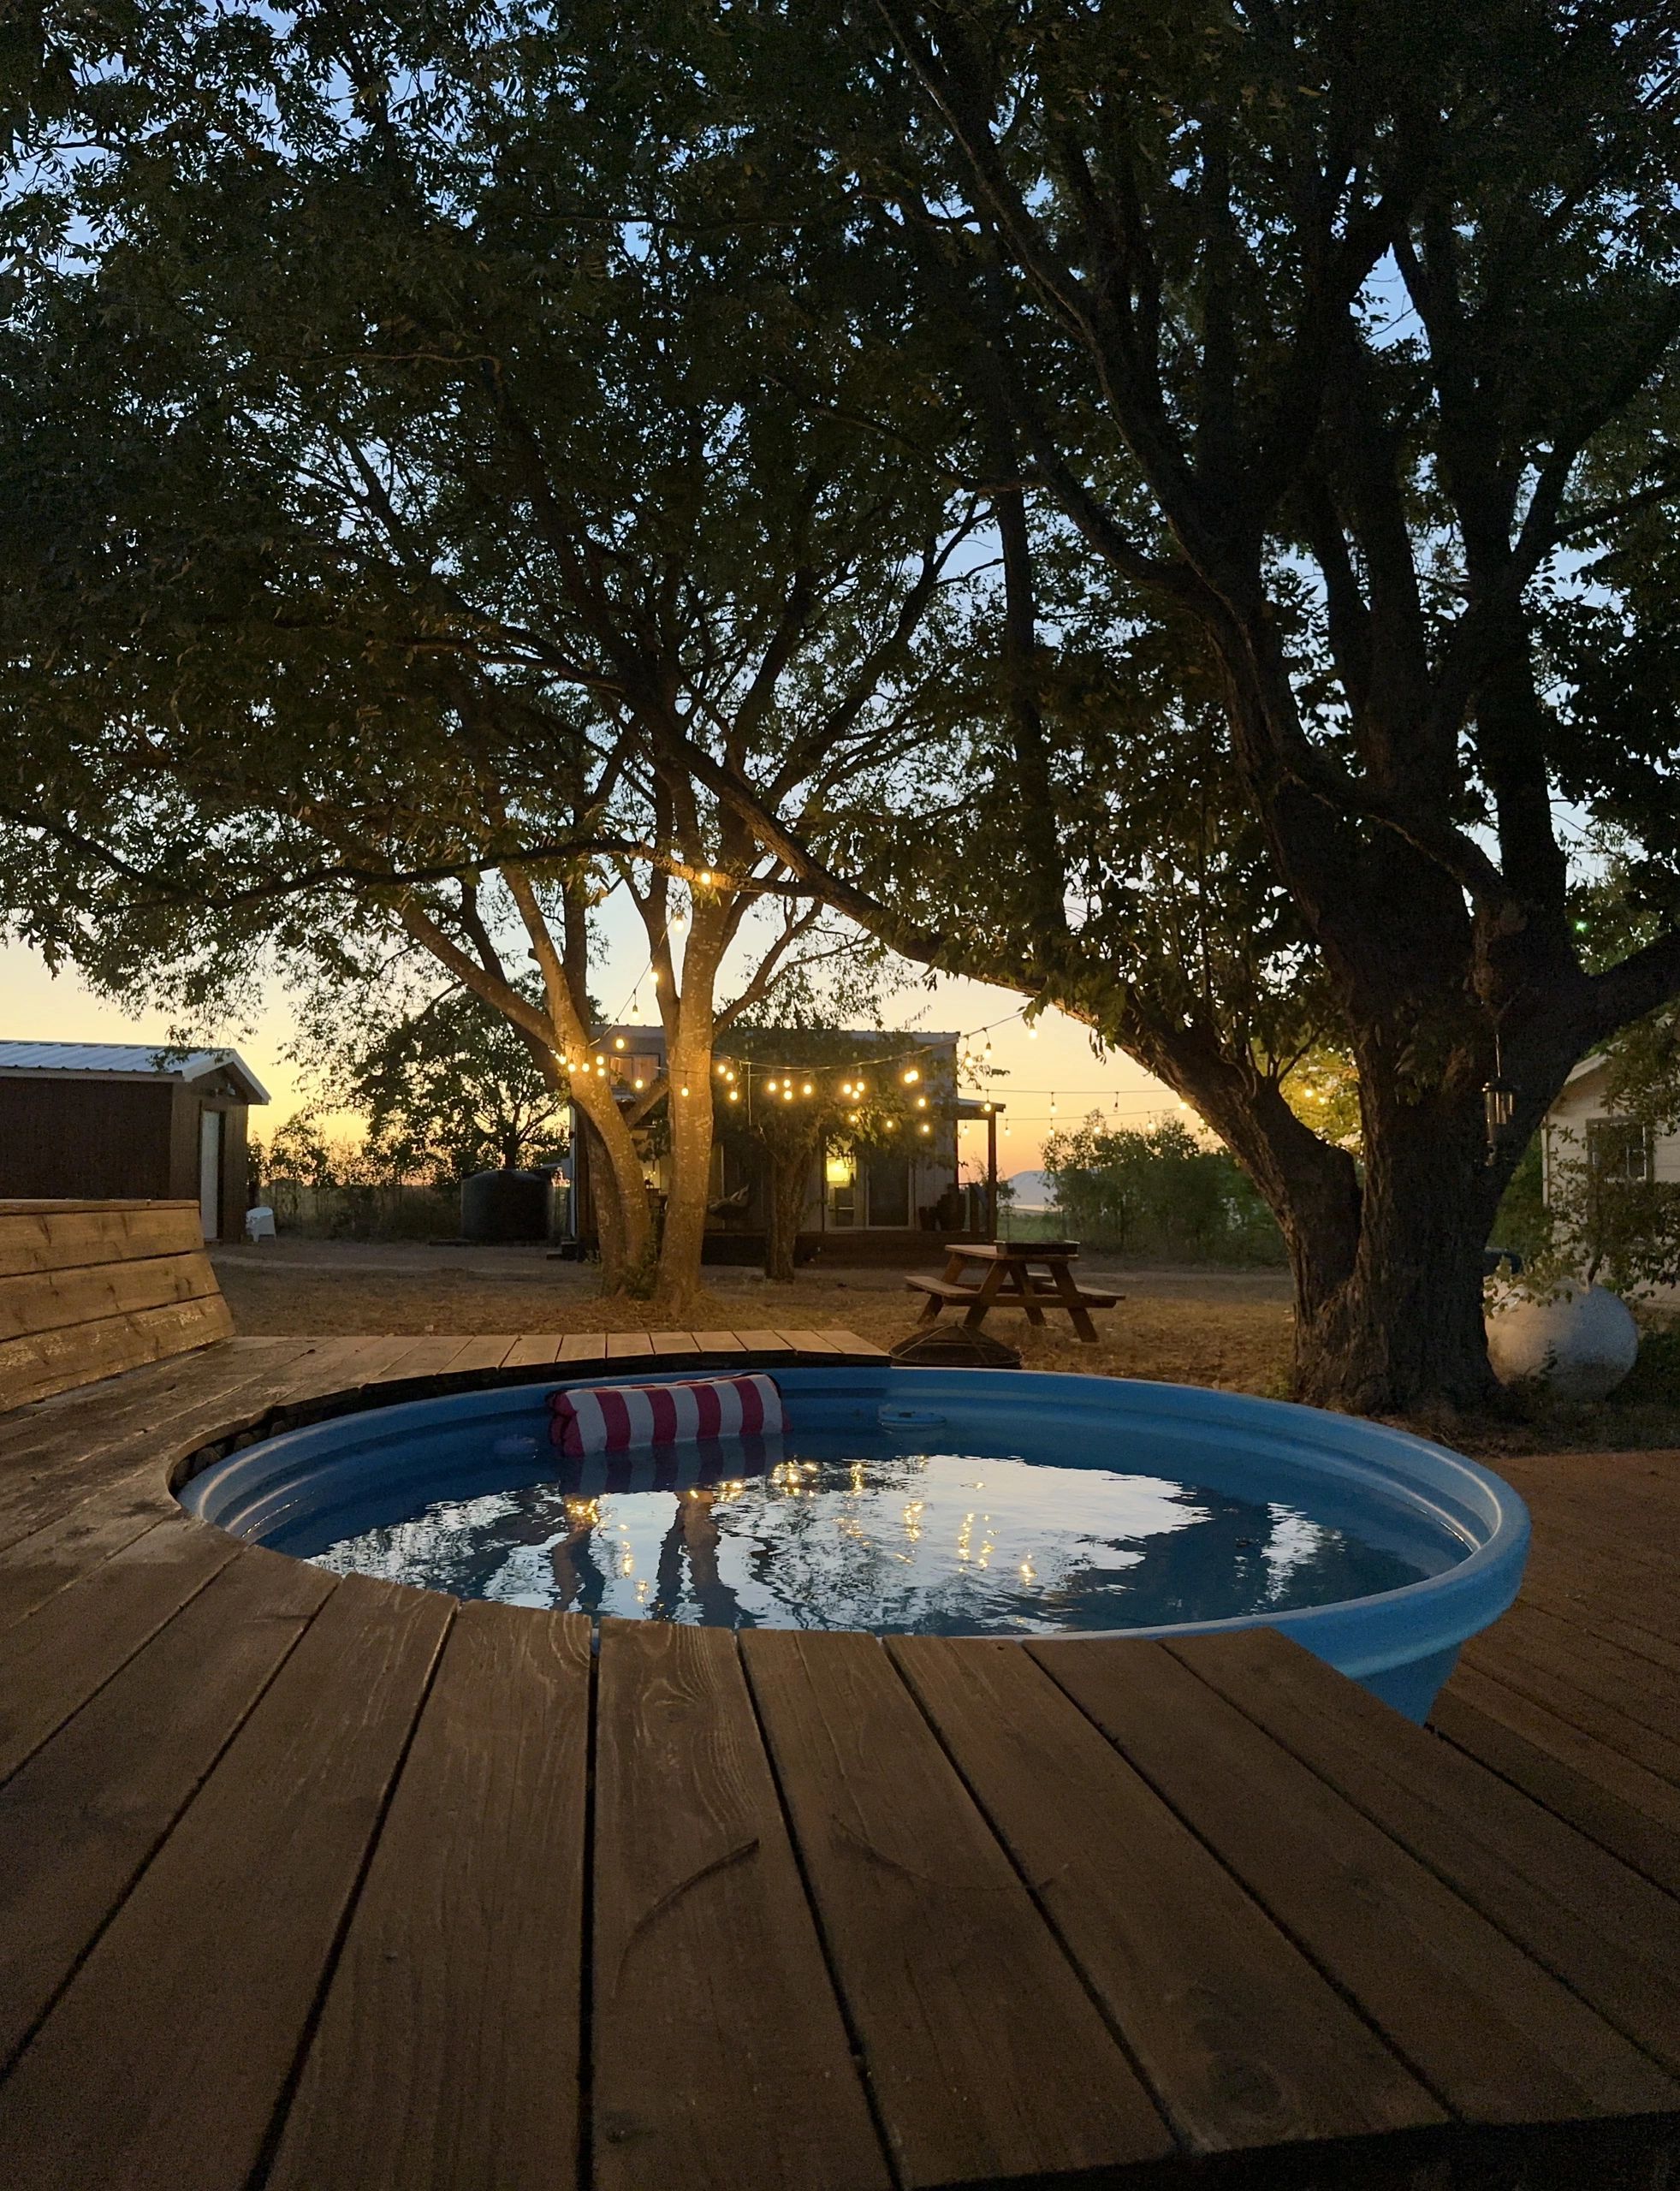 Sunset view from the Persimmon Hill cowboy pool in Rogers, Texas.